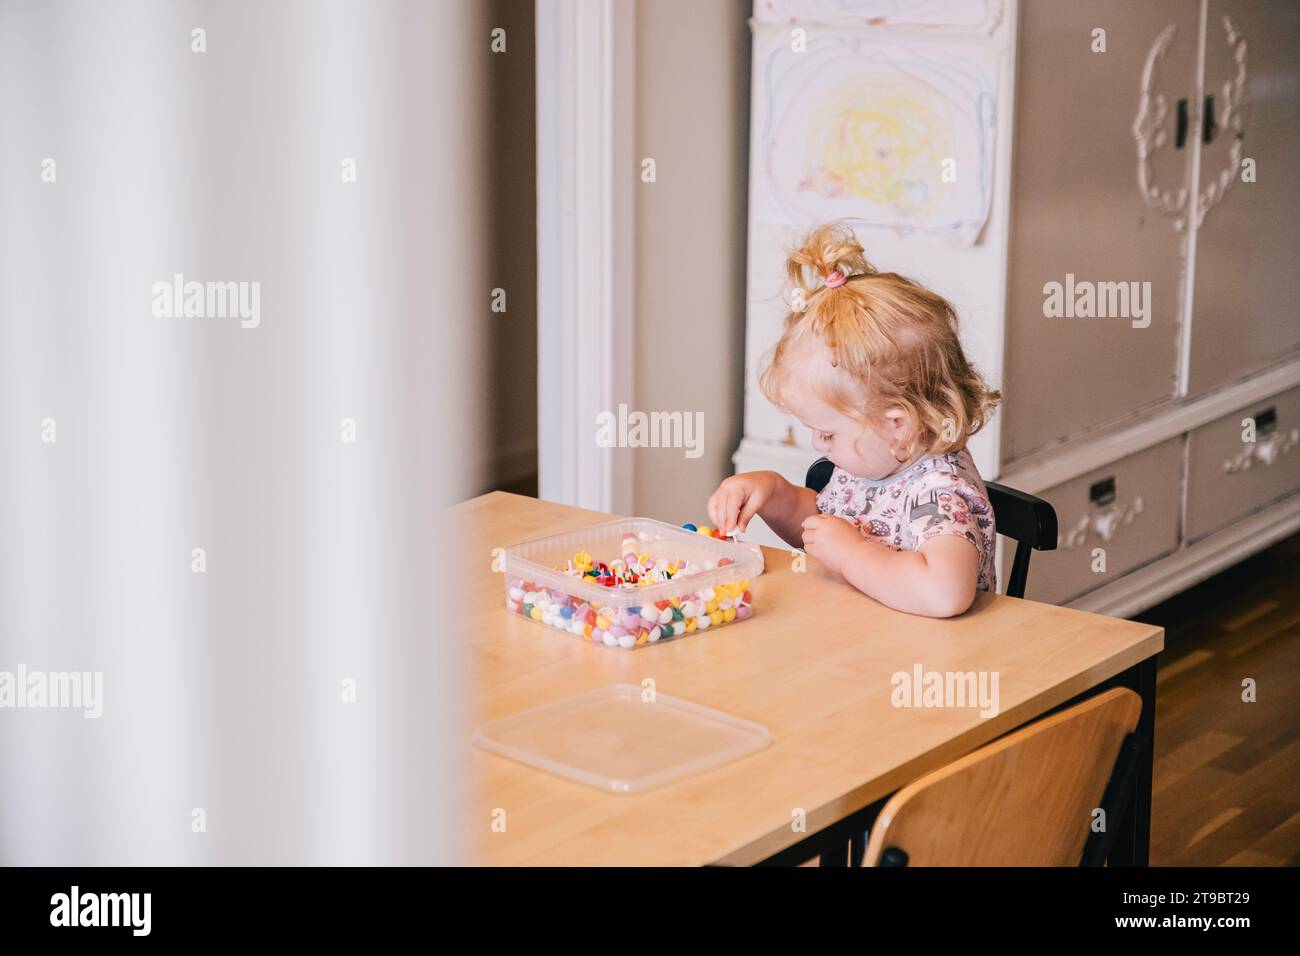 Blond girl playing with beads on table at home Stock Photo